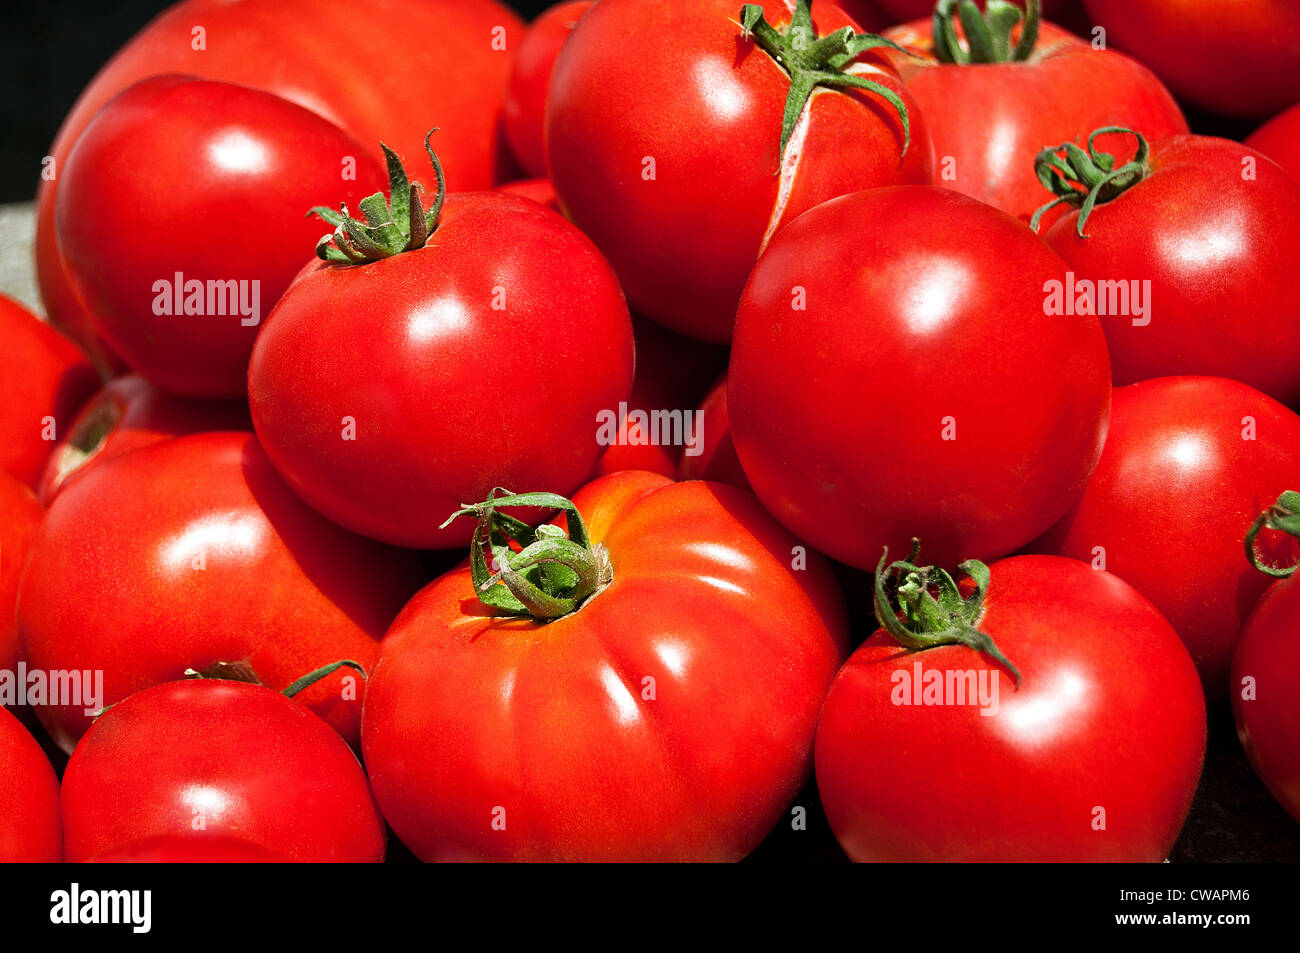 Home gardening production- organic red tomatoes Stock Photo